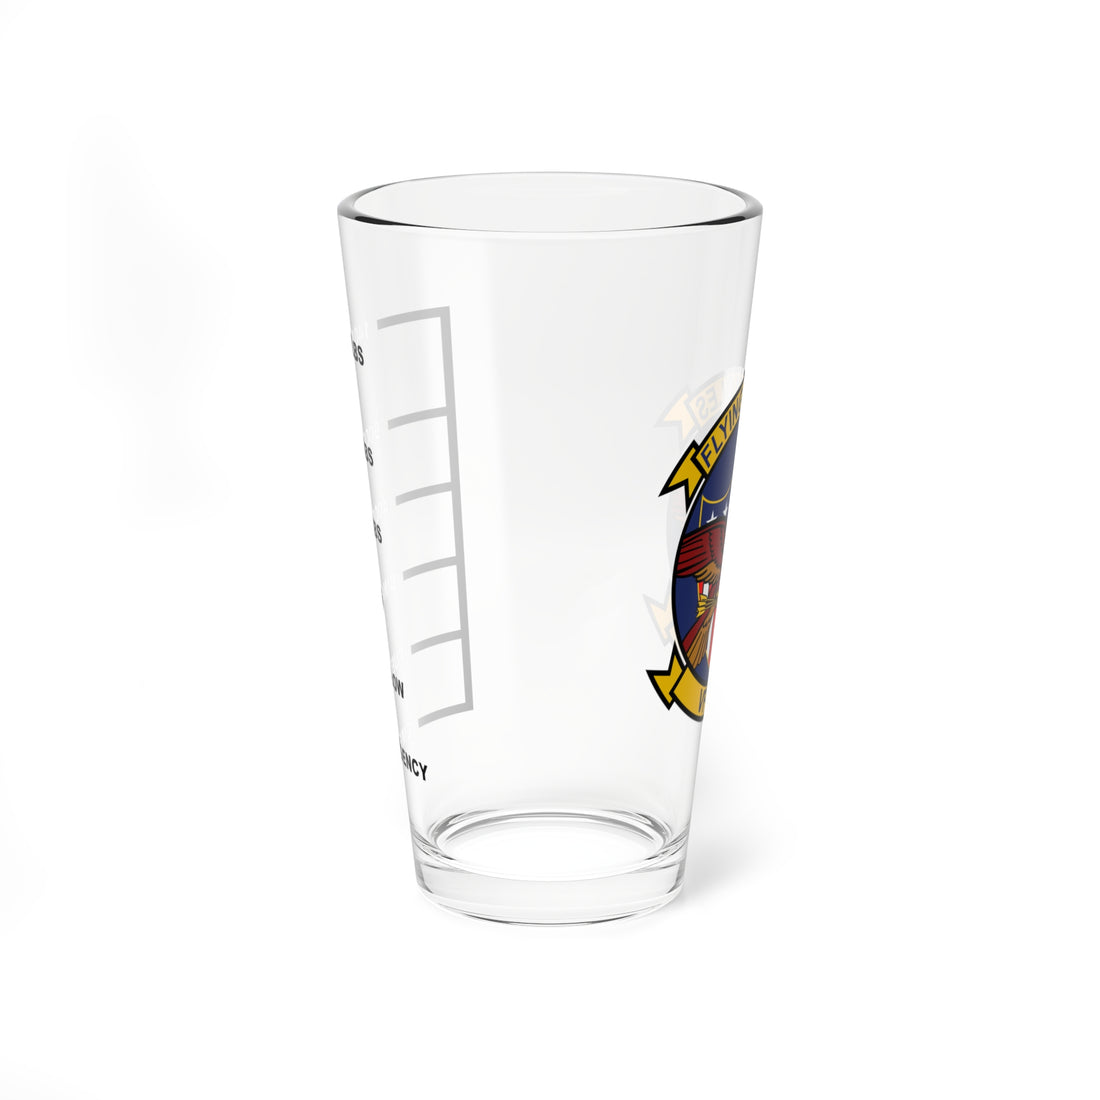 VFA-122 "Flying Eagles" Fuel Low Pint Glass, Navy Strike Fighter Squadron flying the F/A-18 Hornet